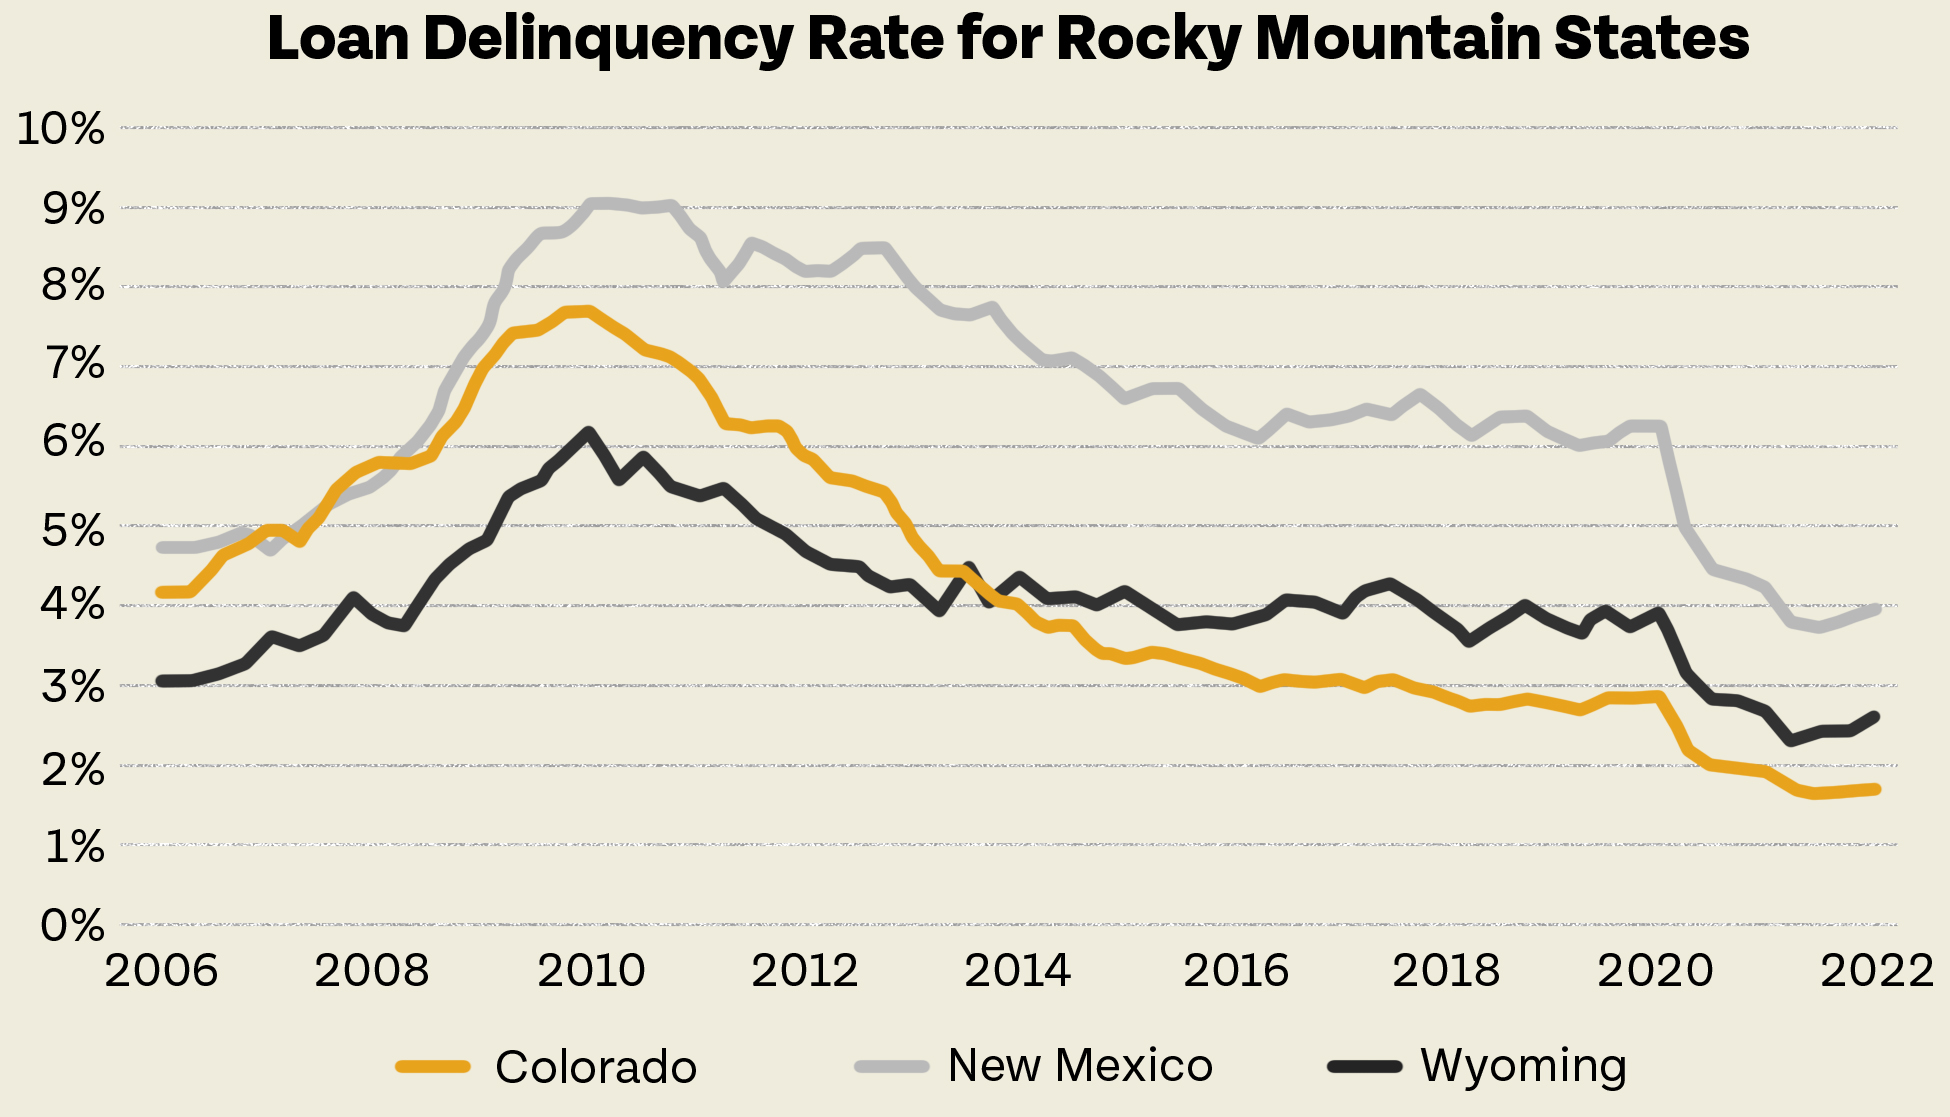 Debt Delinquency Rates for Rocky Mountains States